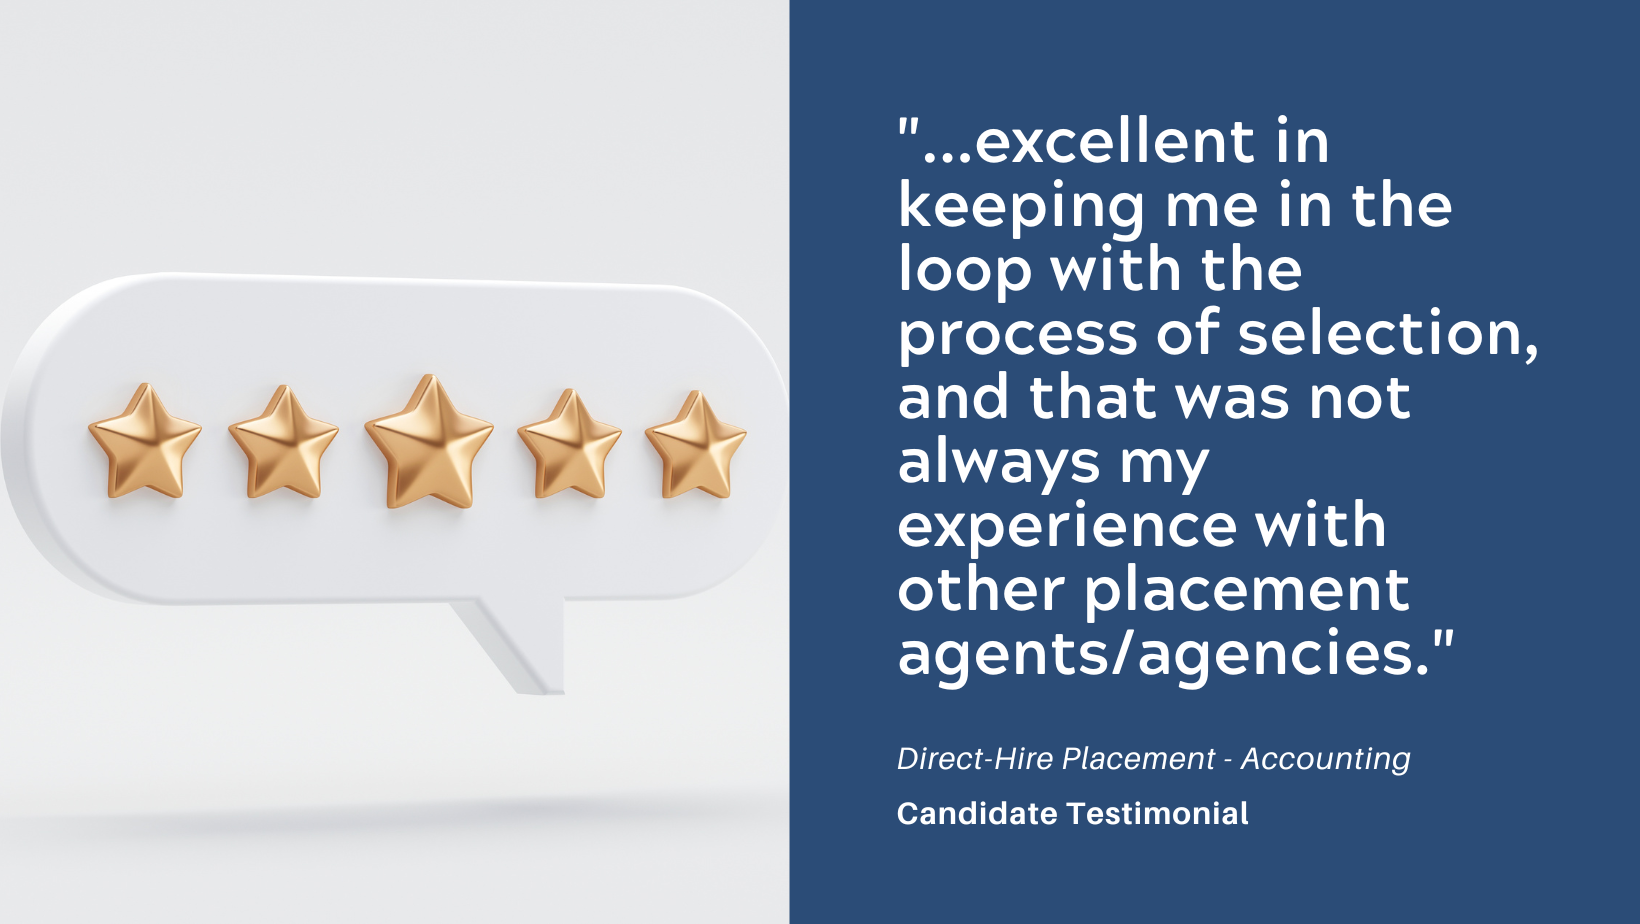 Candidate Testimonial – Direct-Hire Placement, Accounting Manager Position